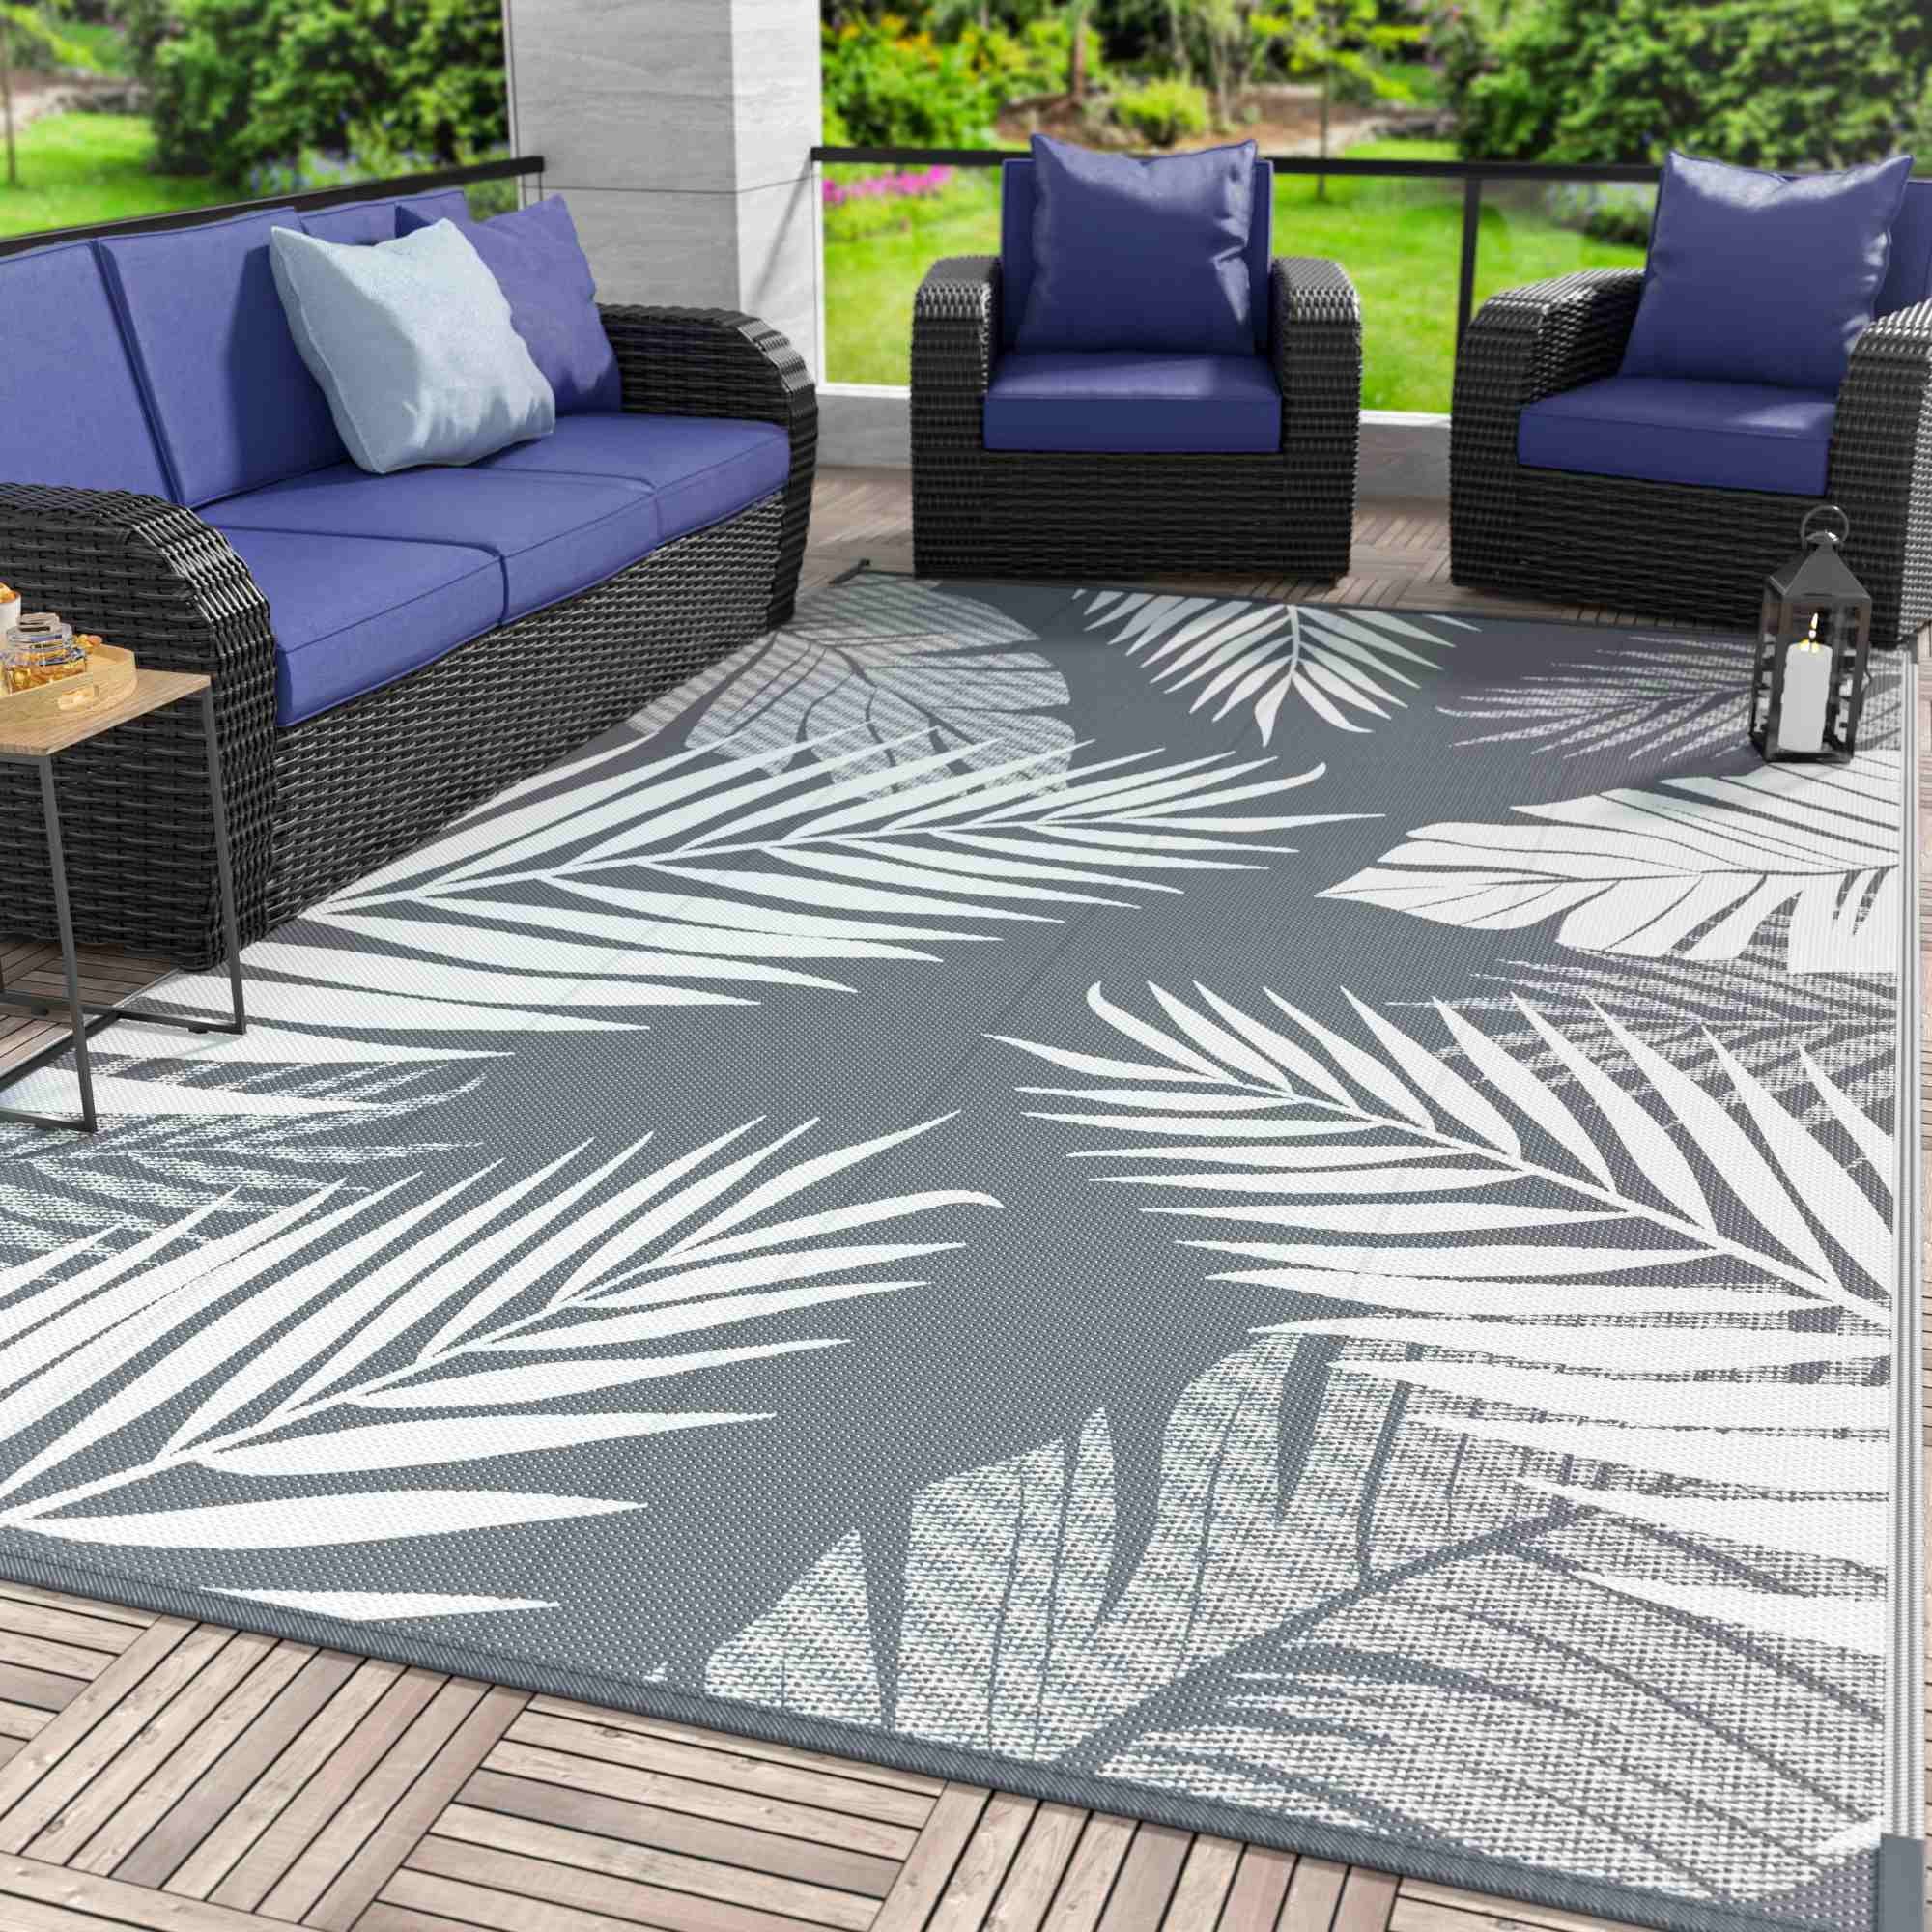 DEORAB Outdoor Rugs for Patio Clearance, Waterproof Plastic Mat, Rv, Camper, Gray & White, 6'x9' | Walmart (US)